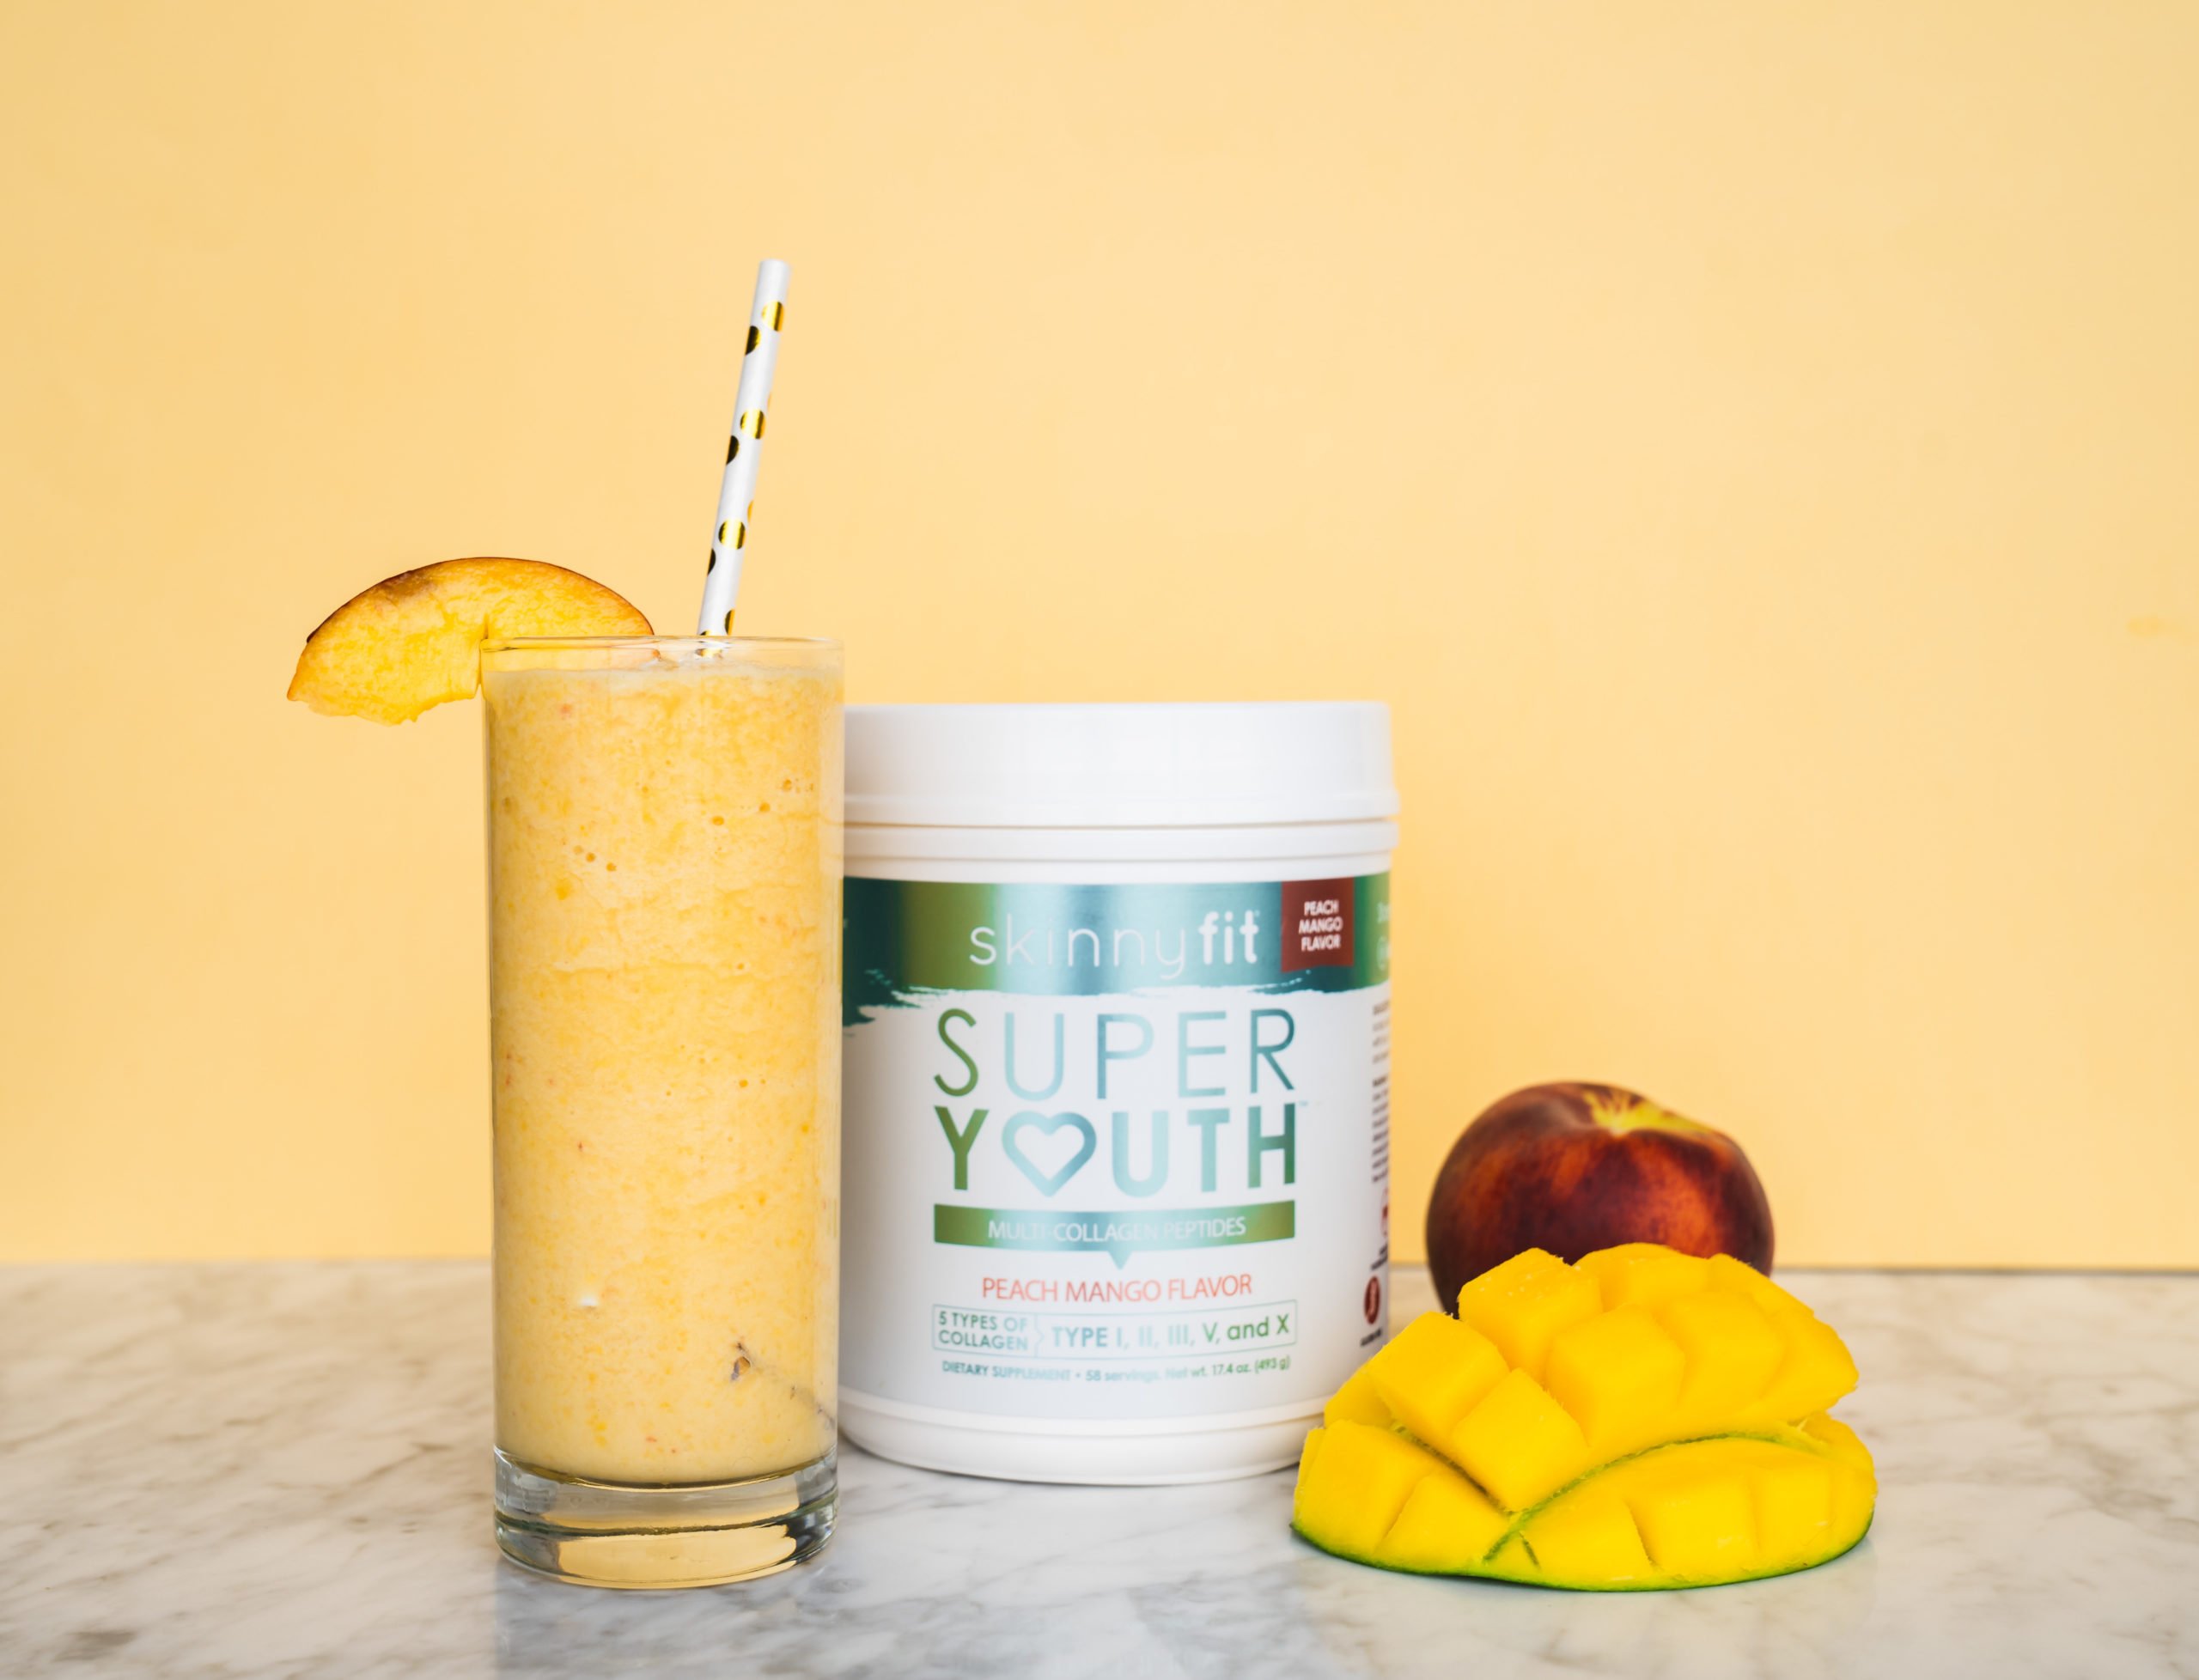 Mango smoothie made with Super Youth Peach Mango collagen peptides